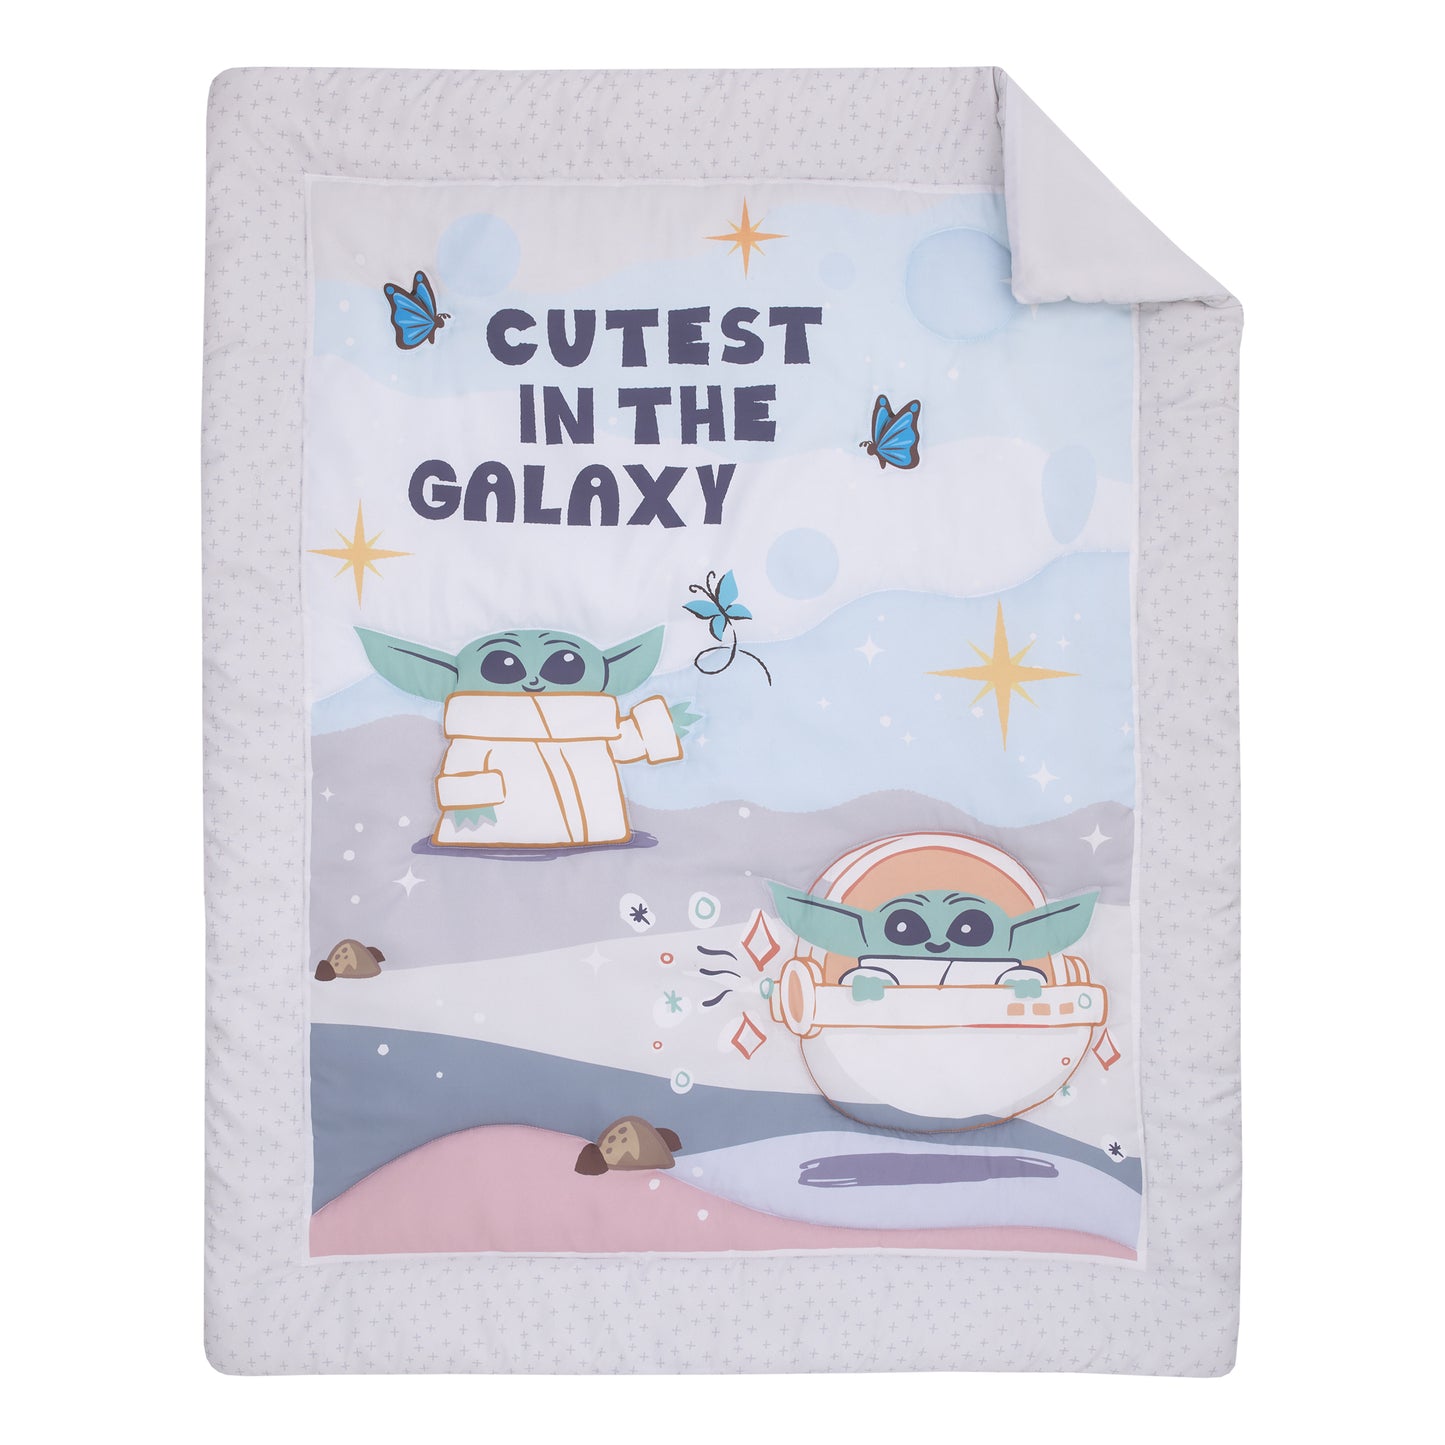 Star Wars Grogu Cutest in the Galaxy Cream, Green, and White 3 Piece Nursery Crib Bedding Set - Comforter, Fitted Crib Sheet, and Crib Skirt